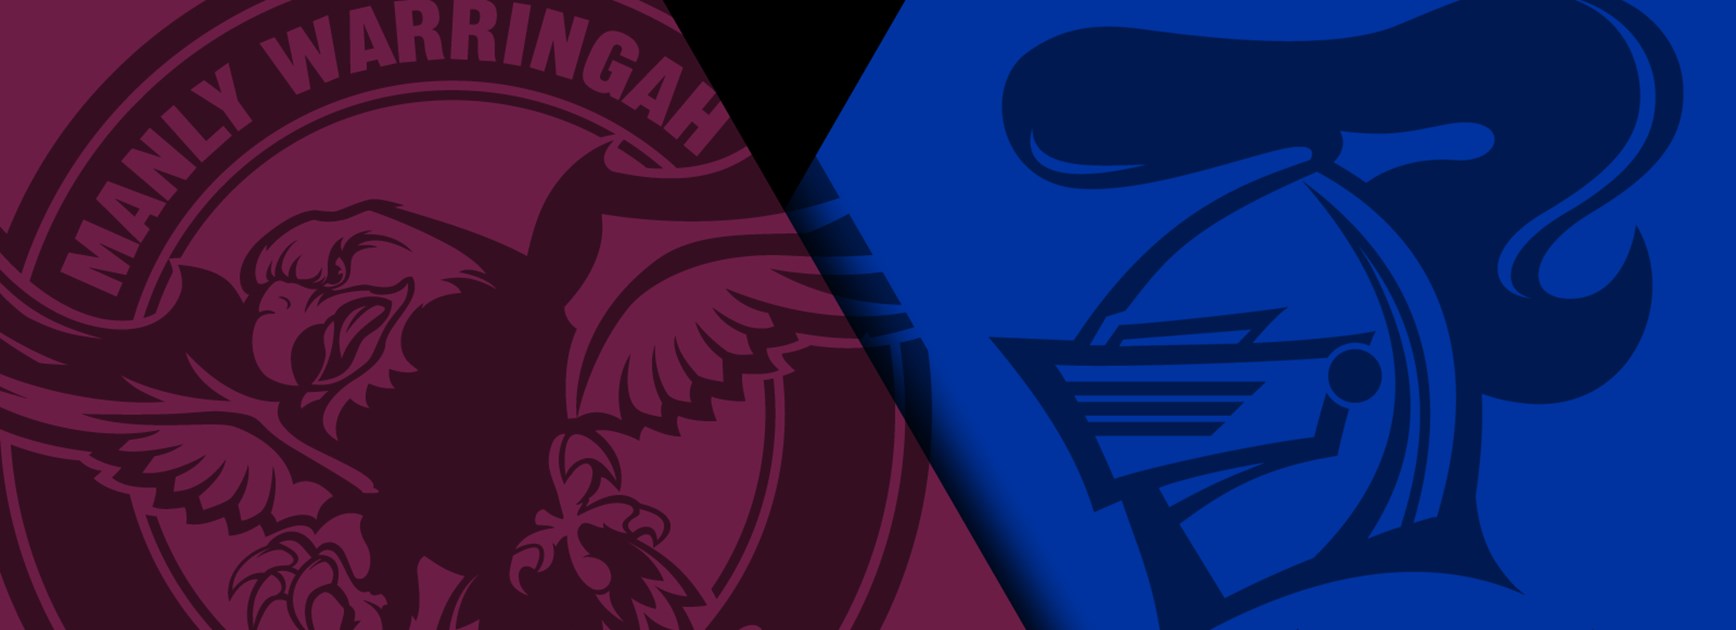 Sea Eagles-Knights preview.